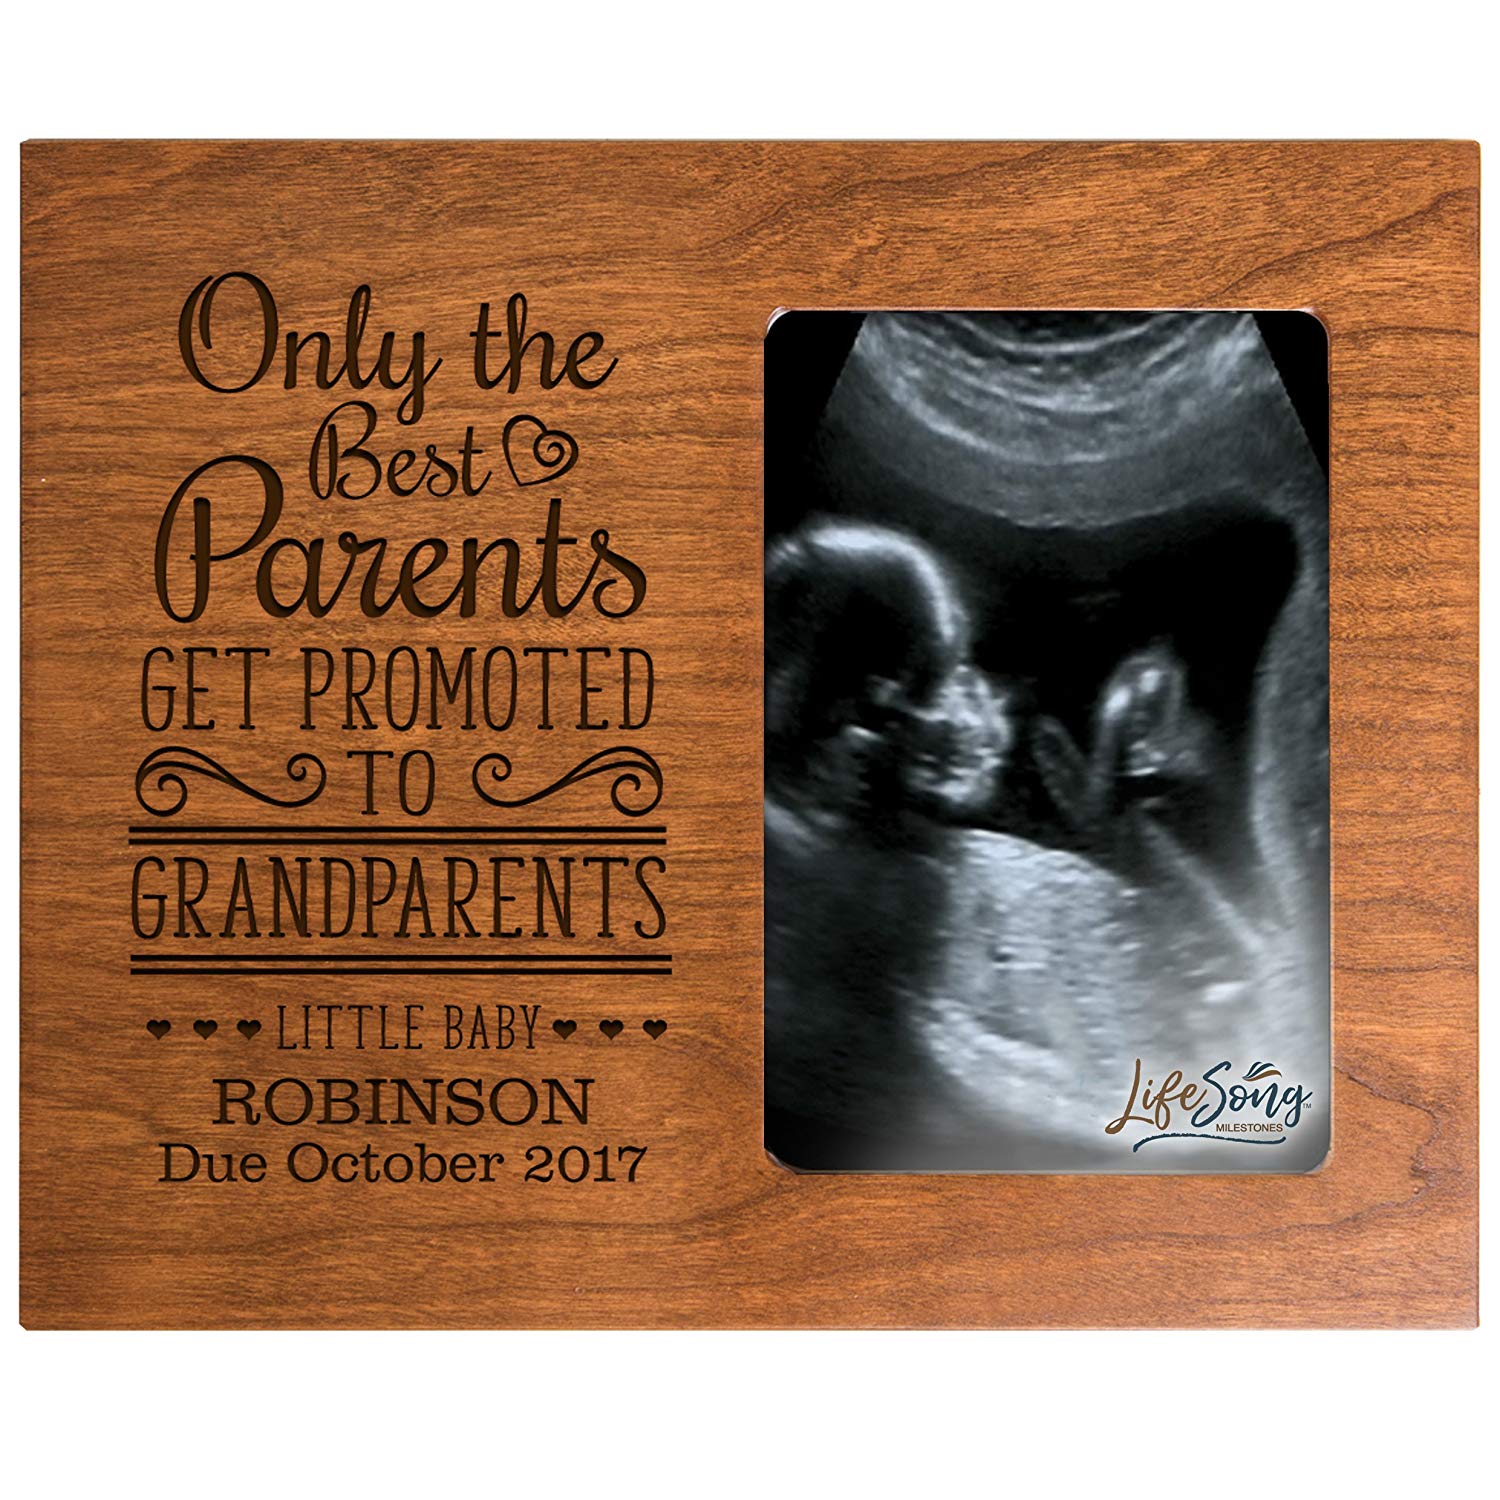 Personalized Baby Sonogram Photo Frame - Promoted to Grandparents - LifeSong Milestones